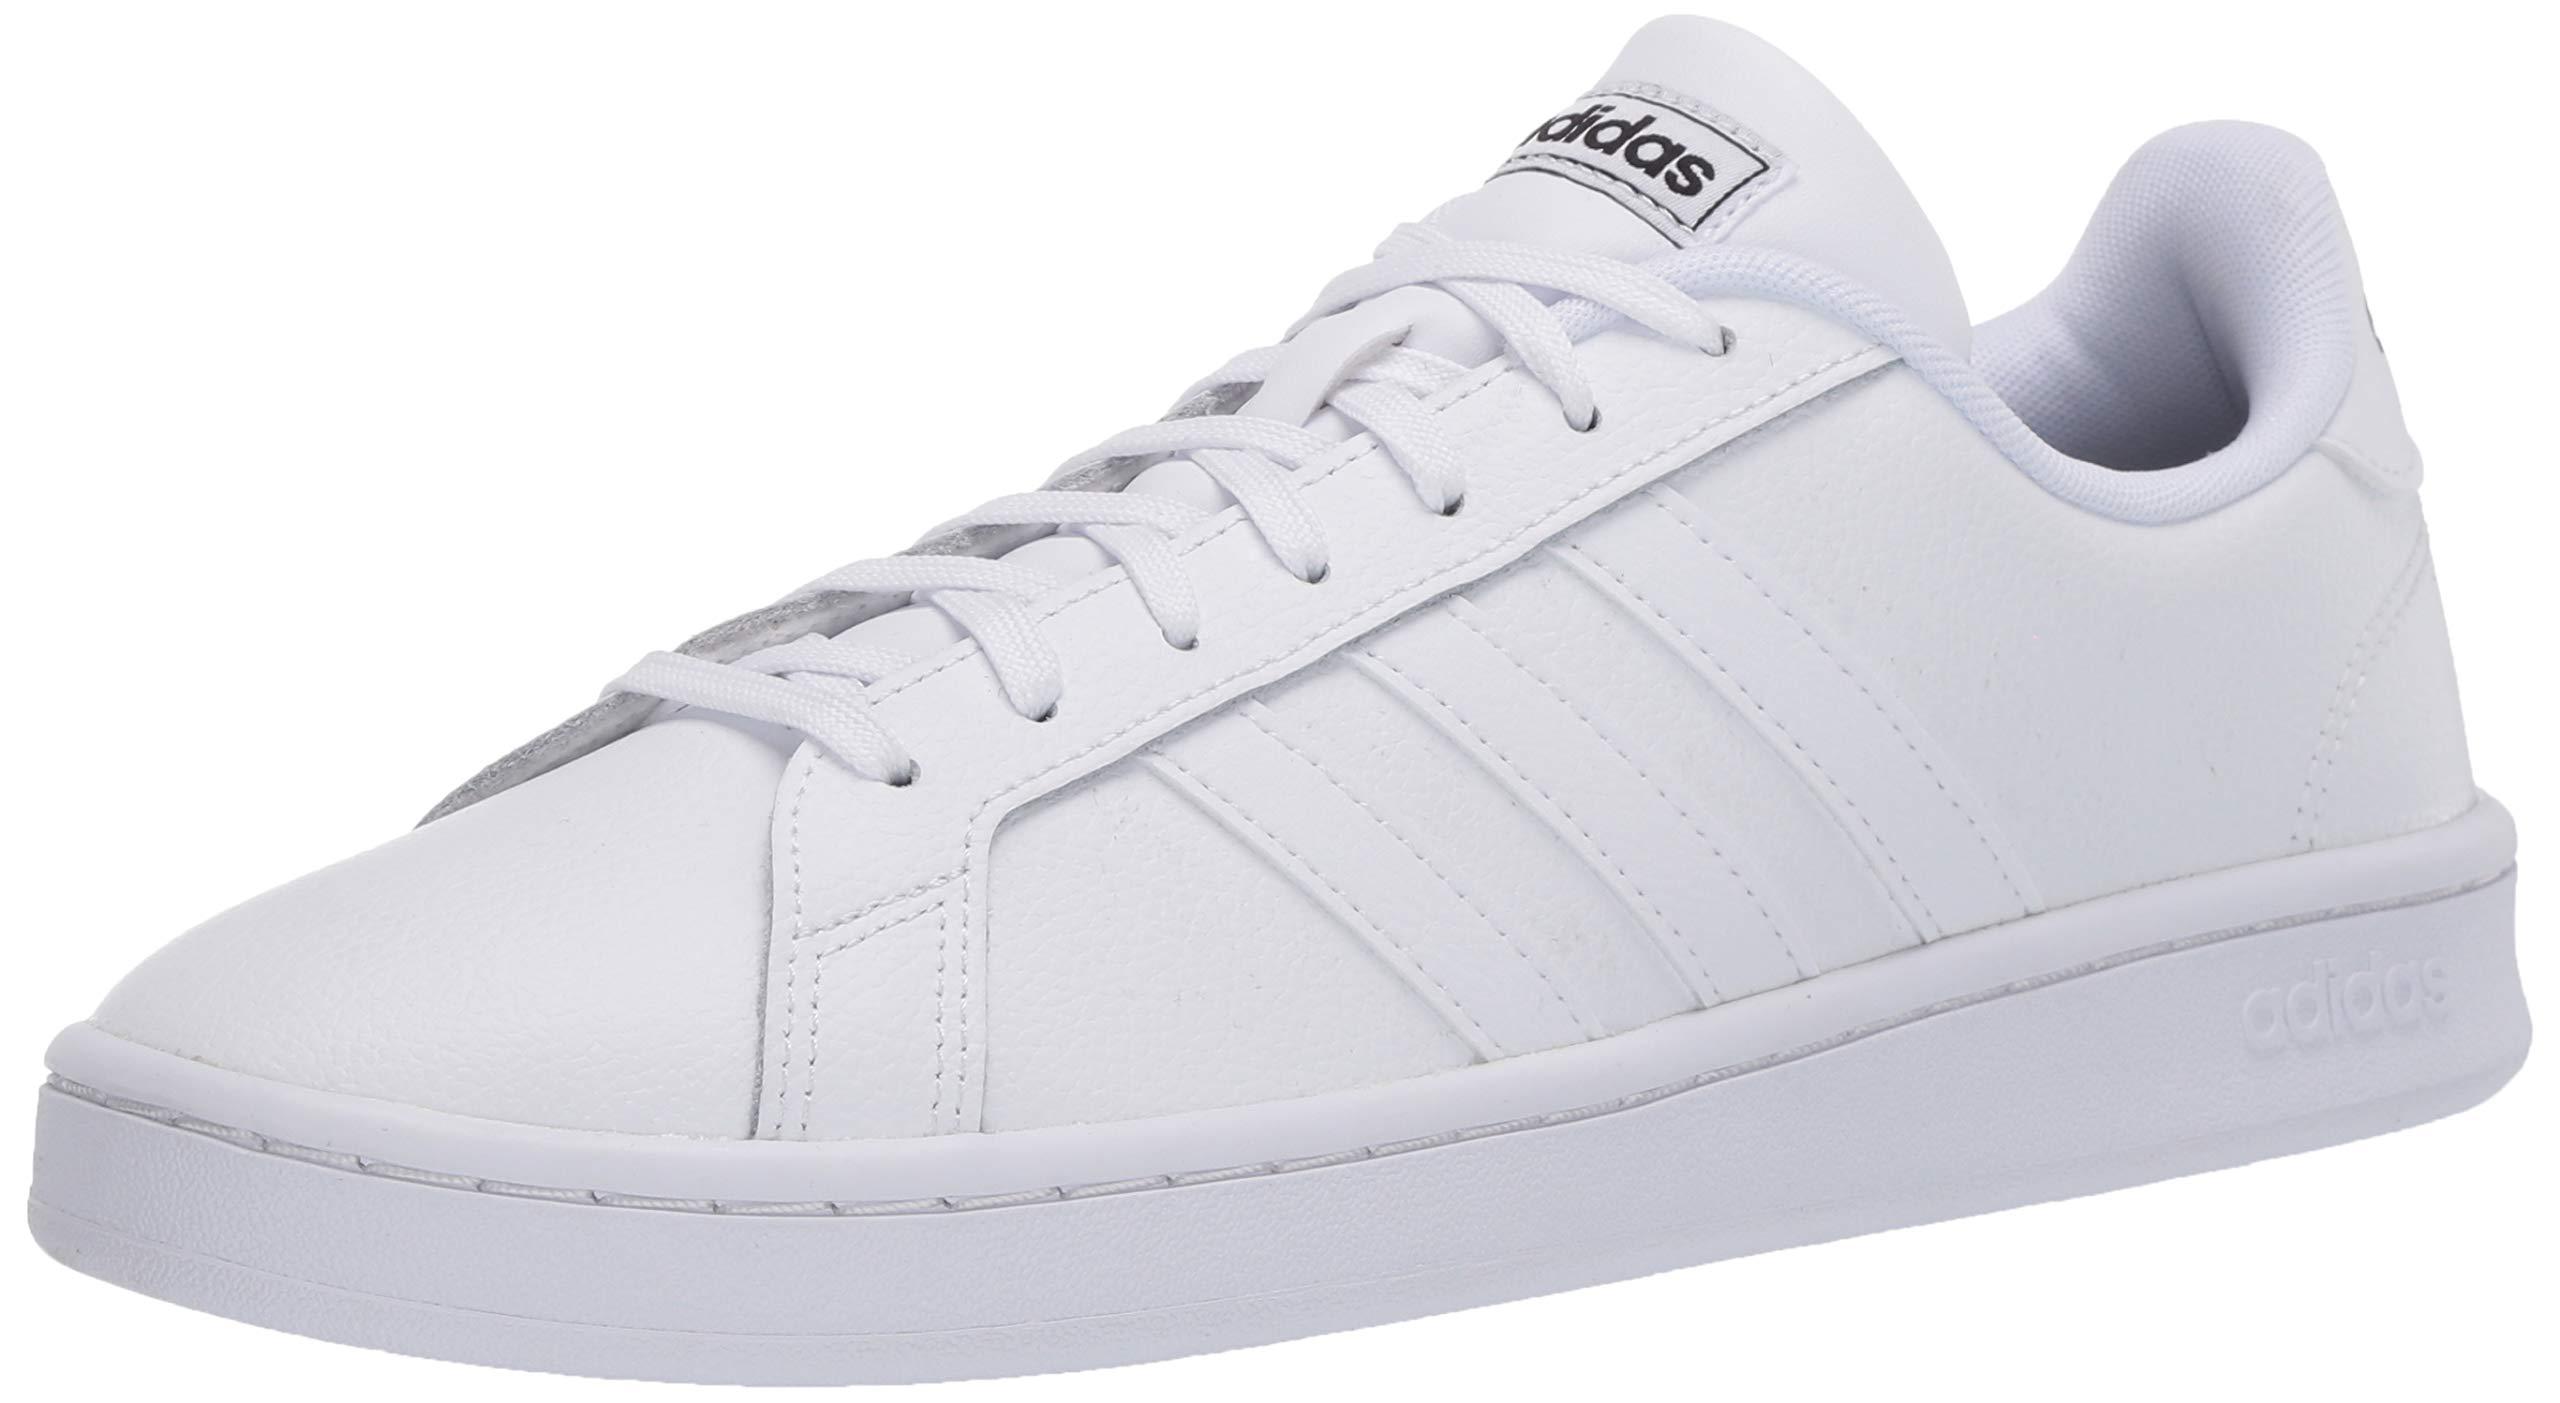 adidas Suede Grand Court Sneaker in White for Men - Save 2% - Lyst